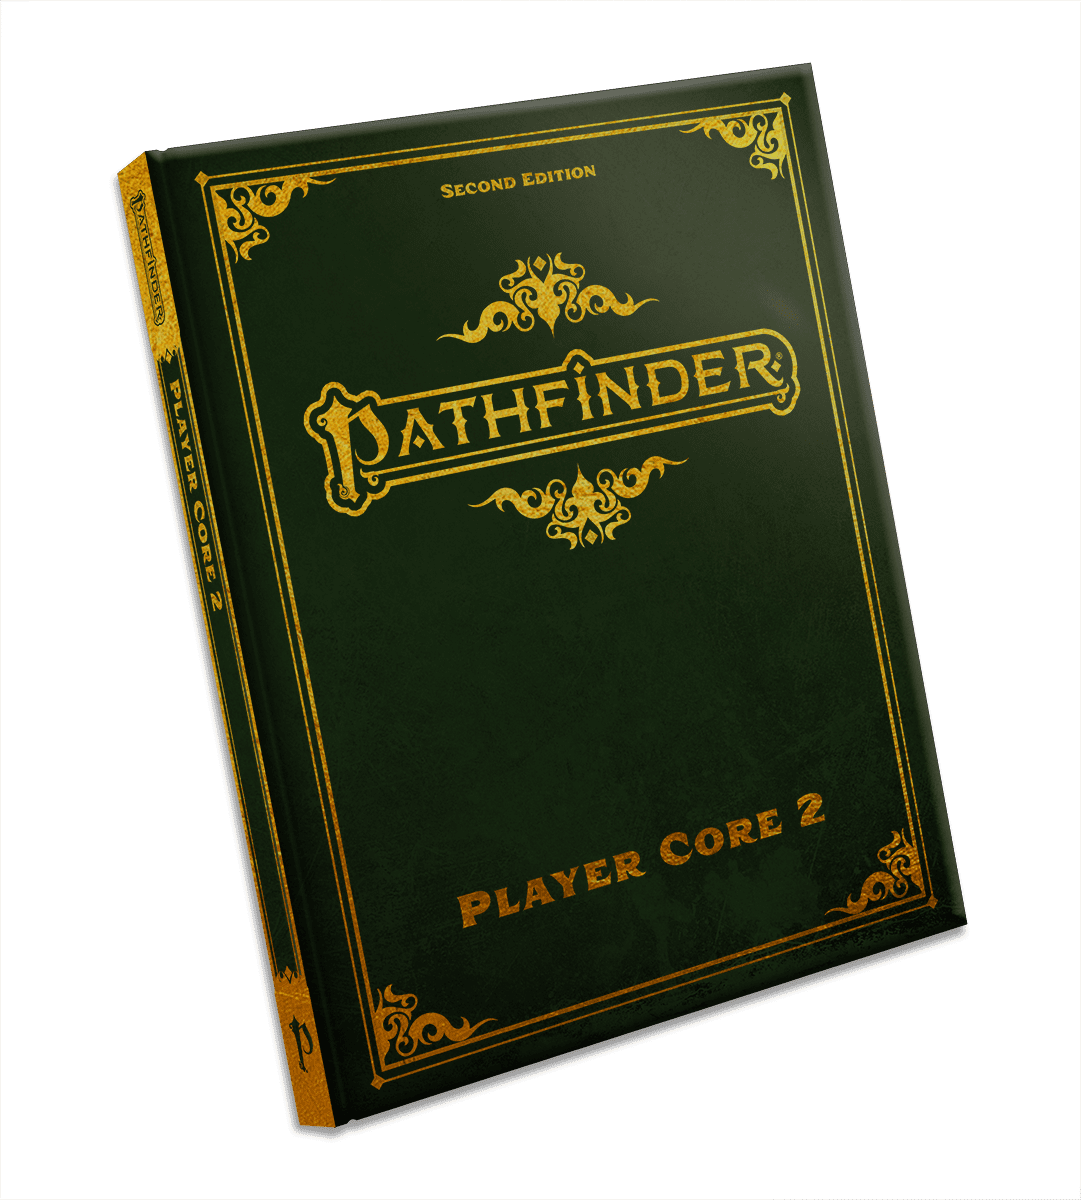 Pathfinder Player Core 2 book special edition